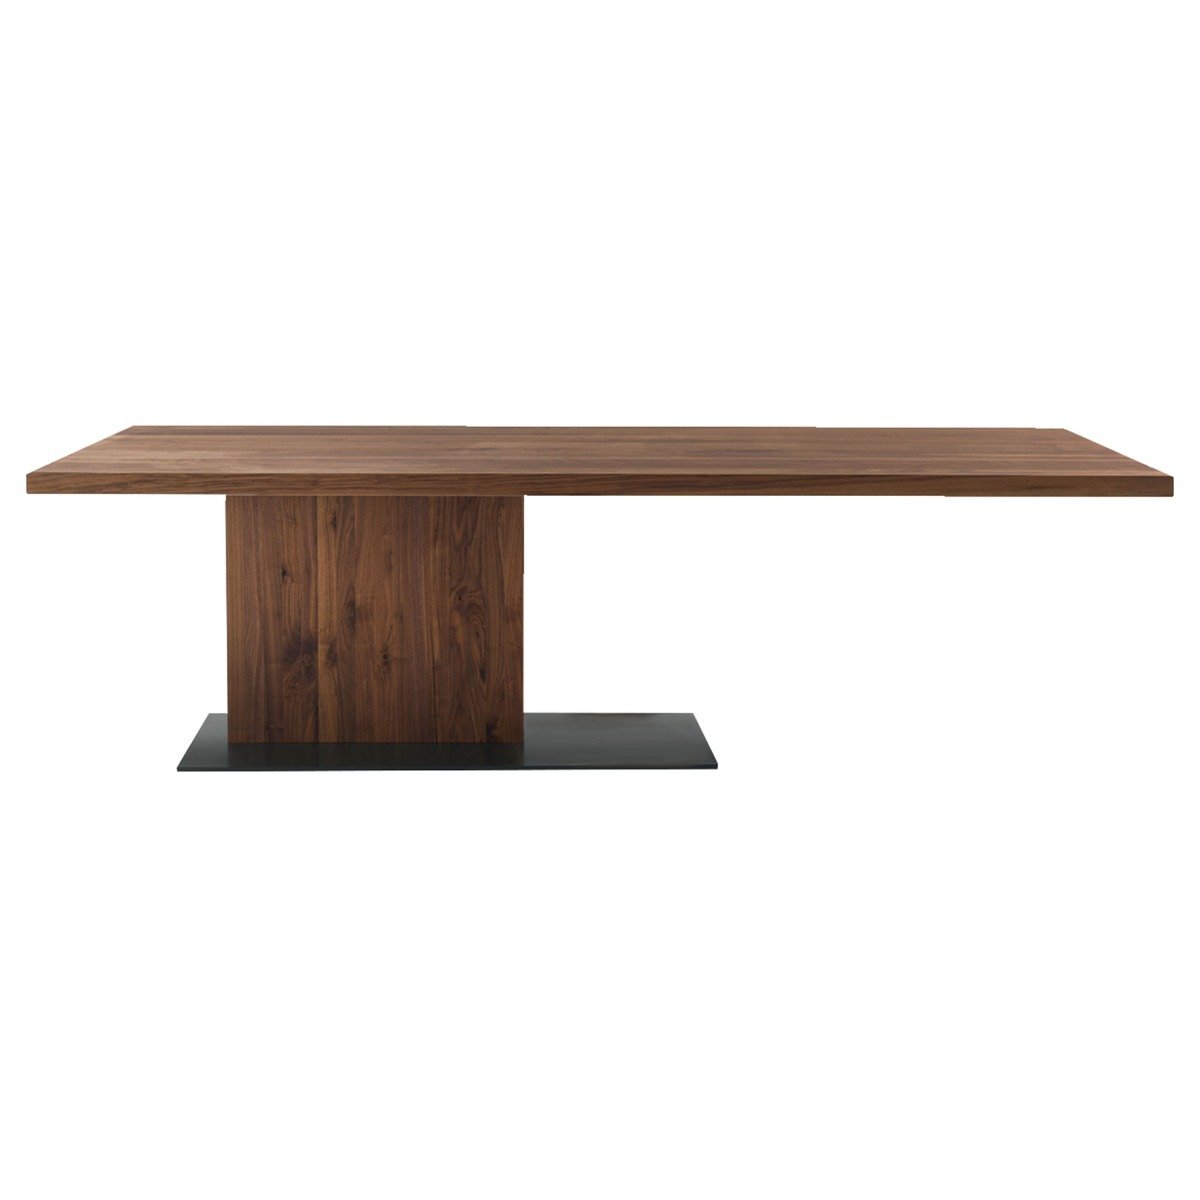 RIVA Liam Wood Dining Table 240x100cm, Brown | Barker & Stonehouse